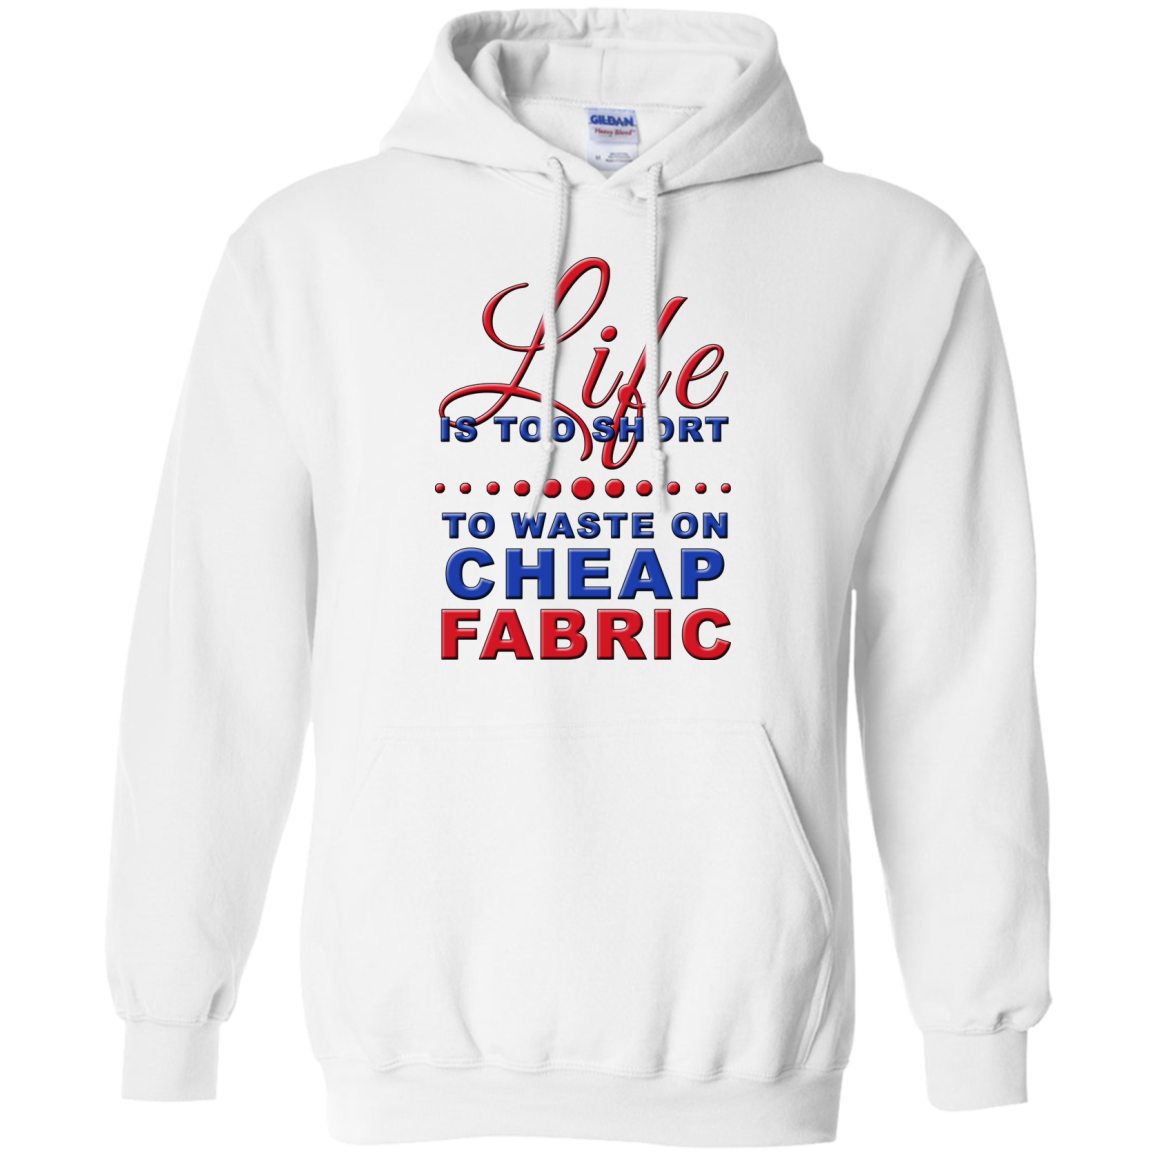 Life is Too Short to Use Cheap Fabric Pullover Hoodies - Crafter4Life - 5